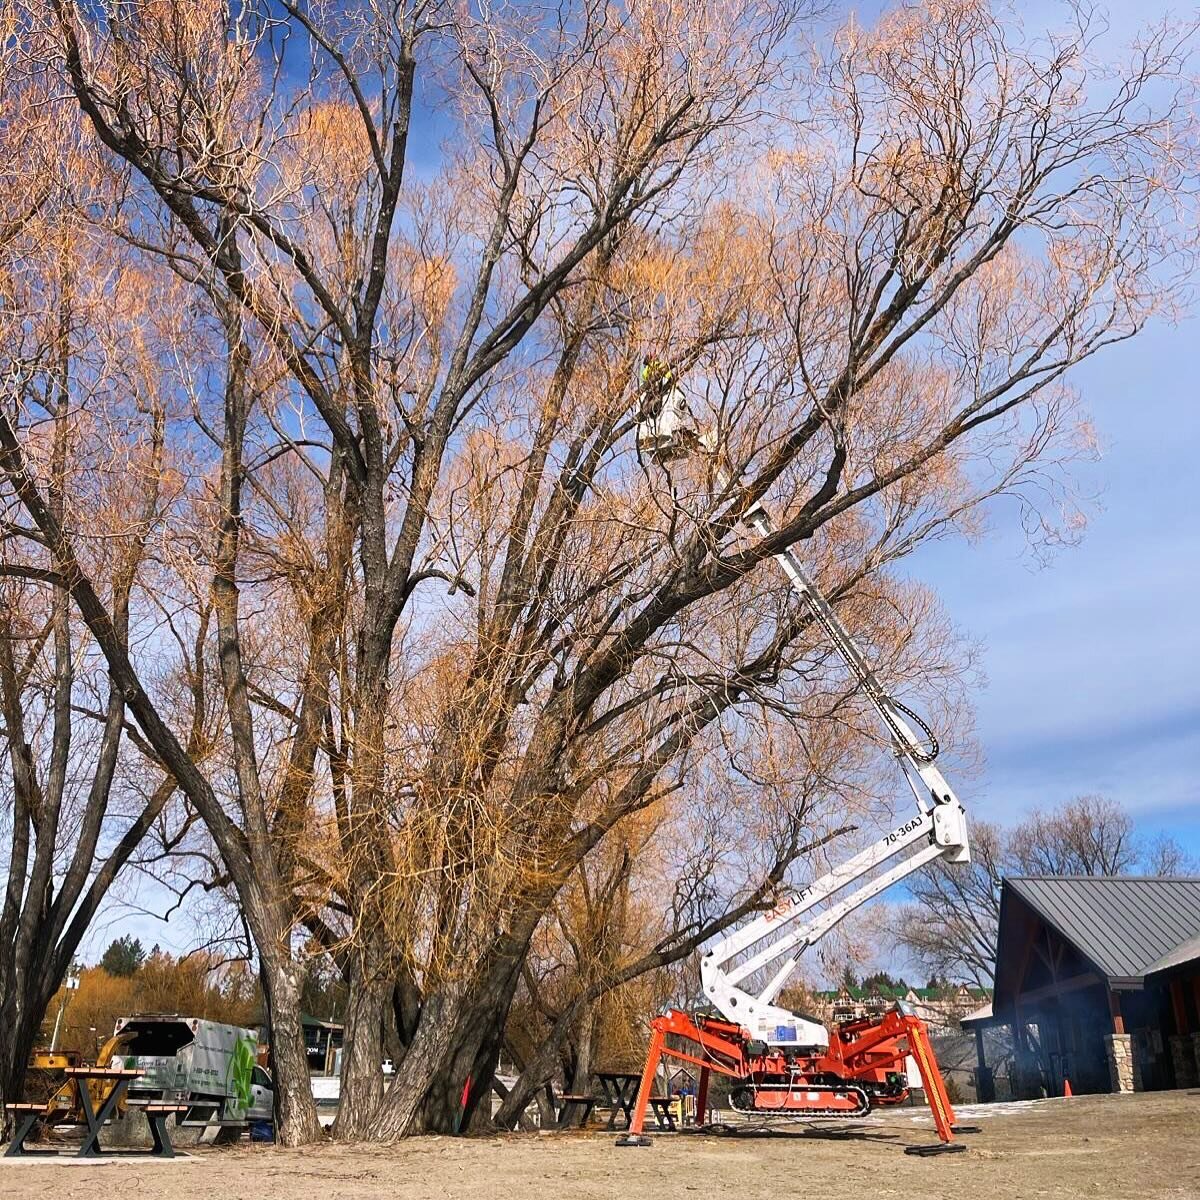 The spider lift stretching its legs with some safety pruning at Kinsmen Beach last week! Removing potential hazards to help ensure worry free beach time to come.